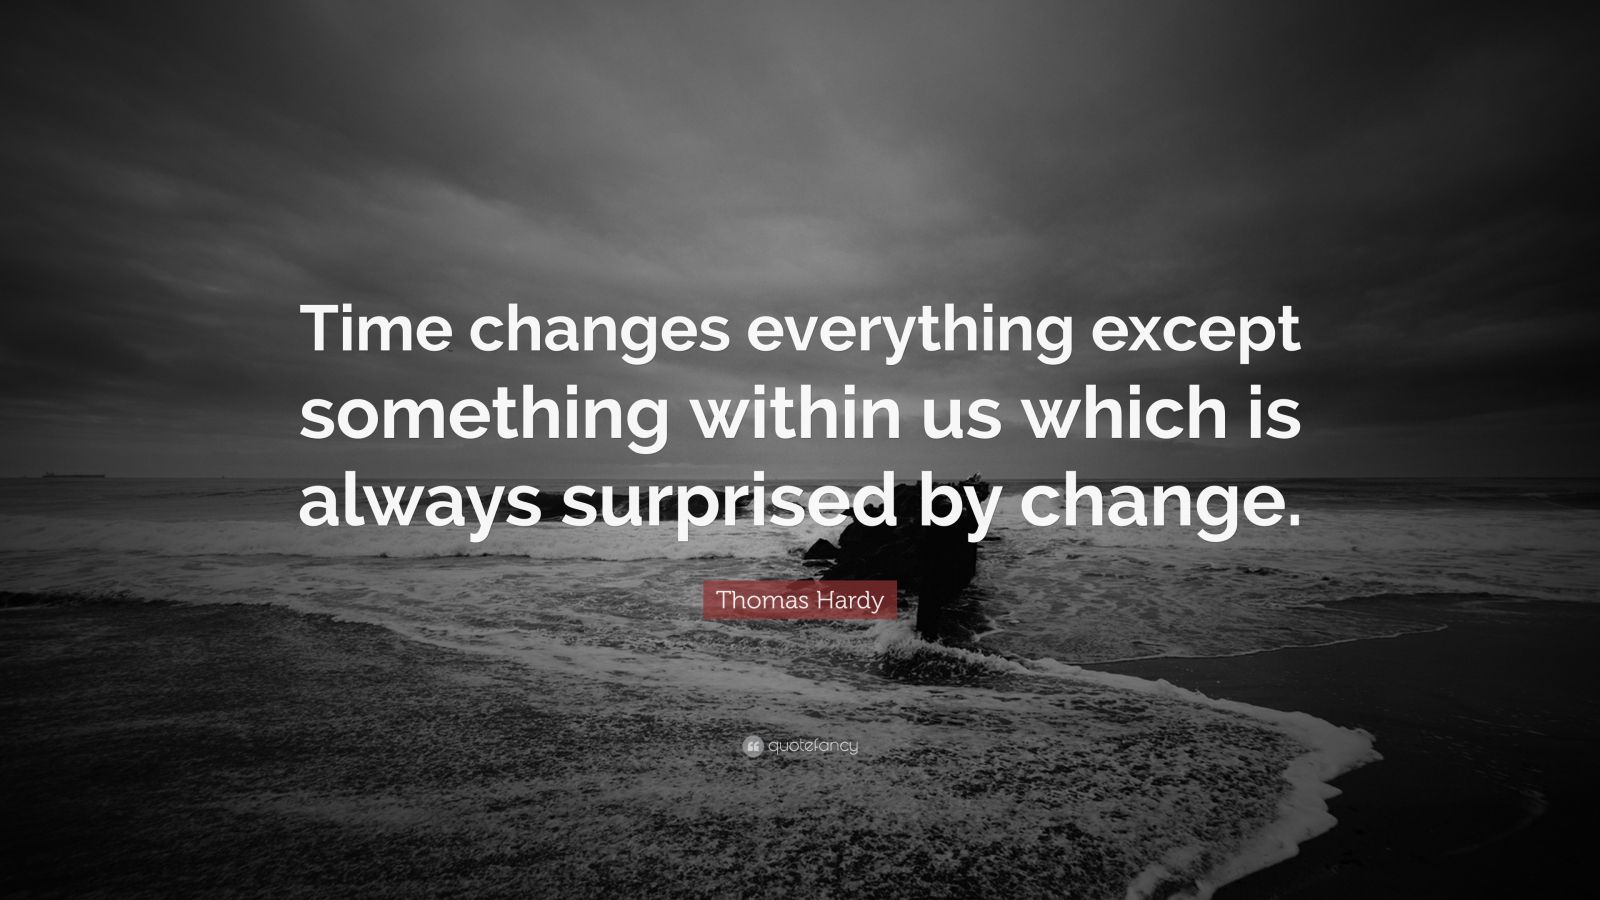 Thomas Hardy Quote: “Time changes everything except something within us ...